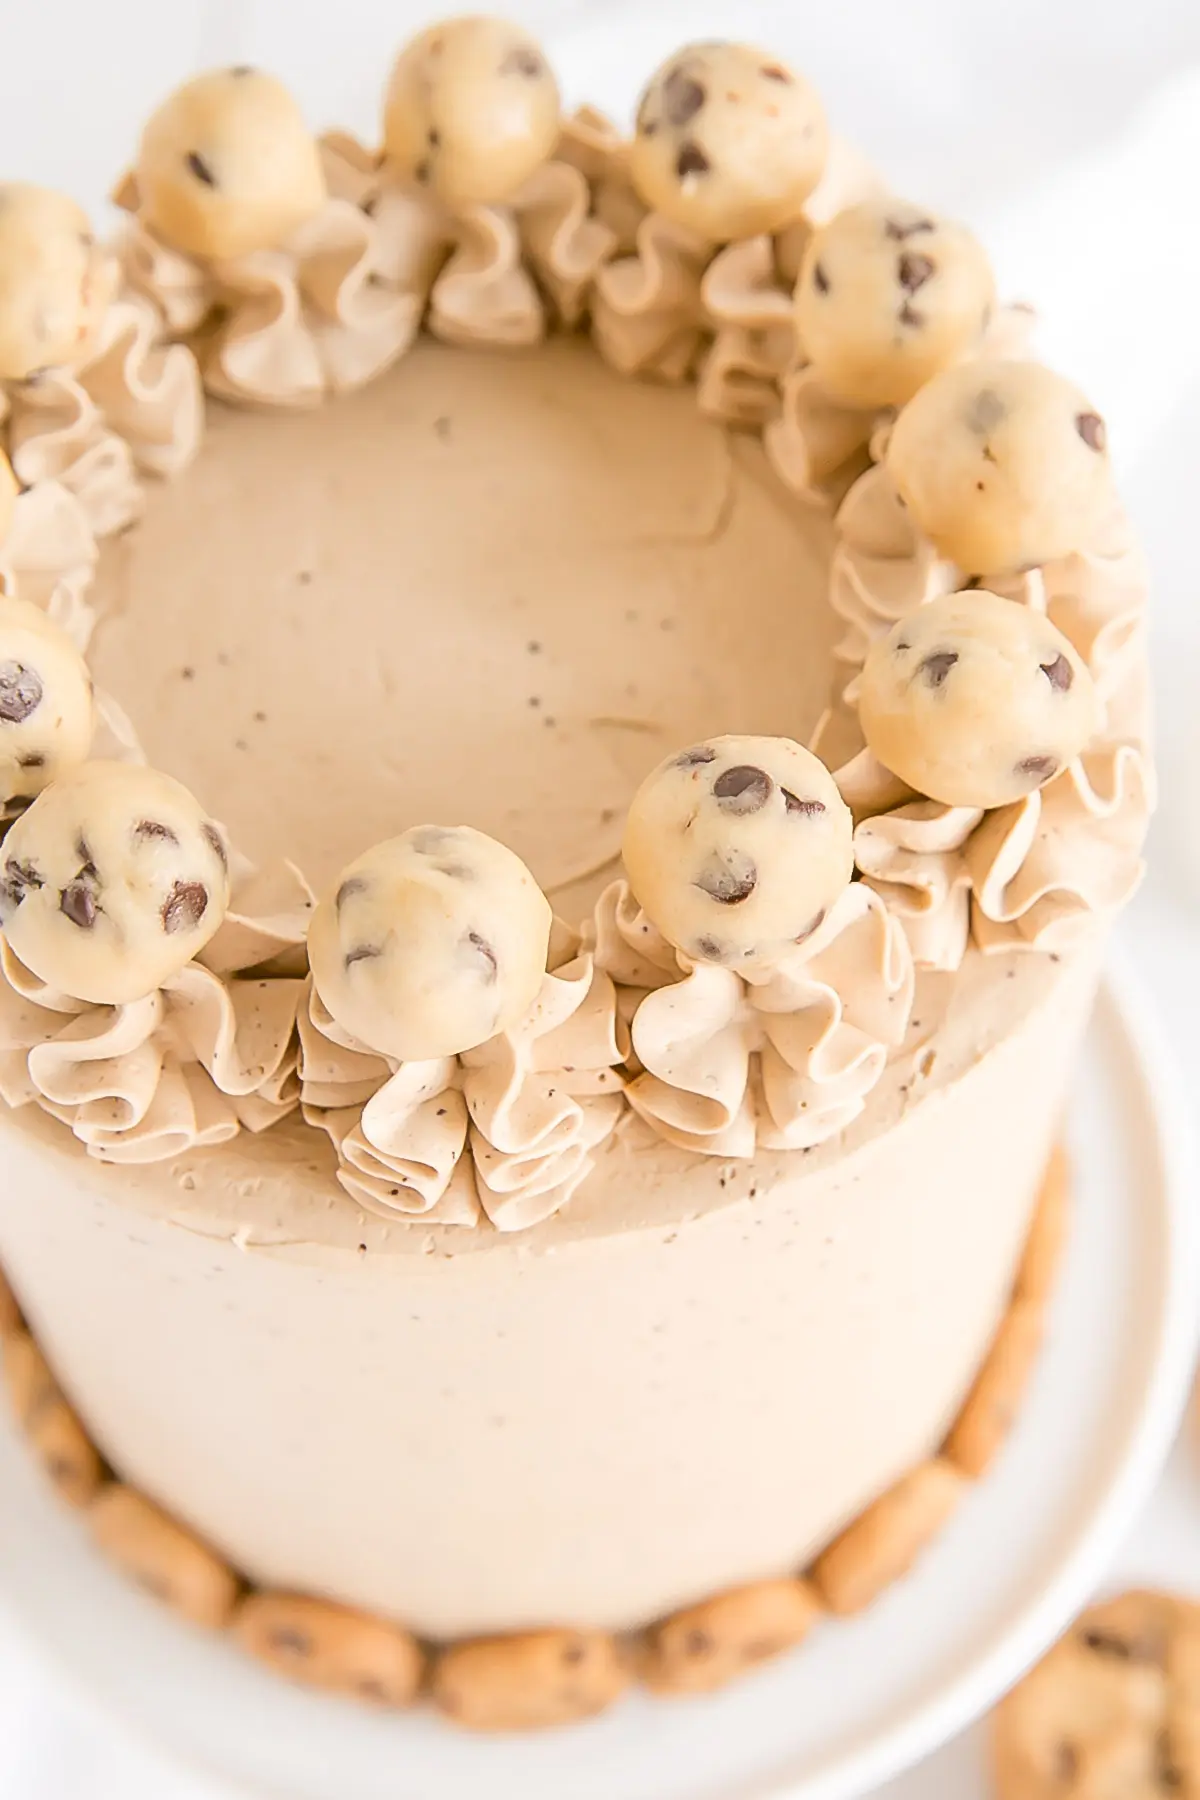 Edible cookie dough balls on a Chocolate Chip Cookie Cake